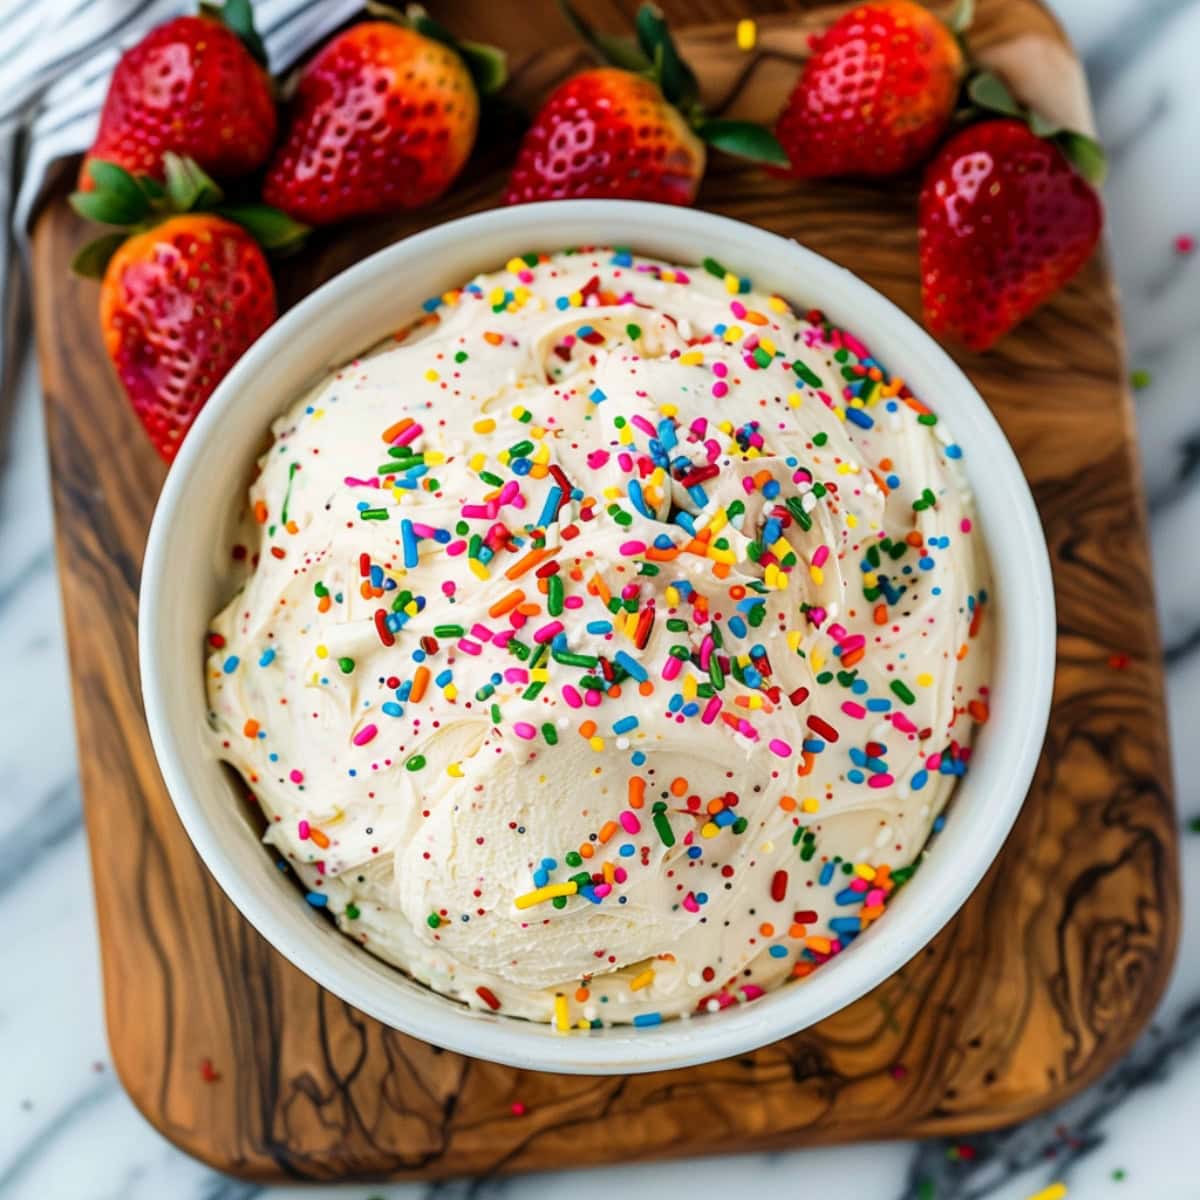 Delicious funfetti cake dip, garnished with extra sprinkles and served with fresh strawberries.